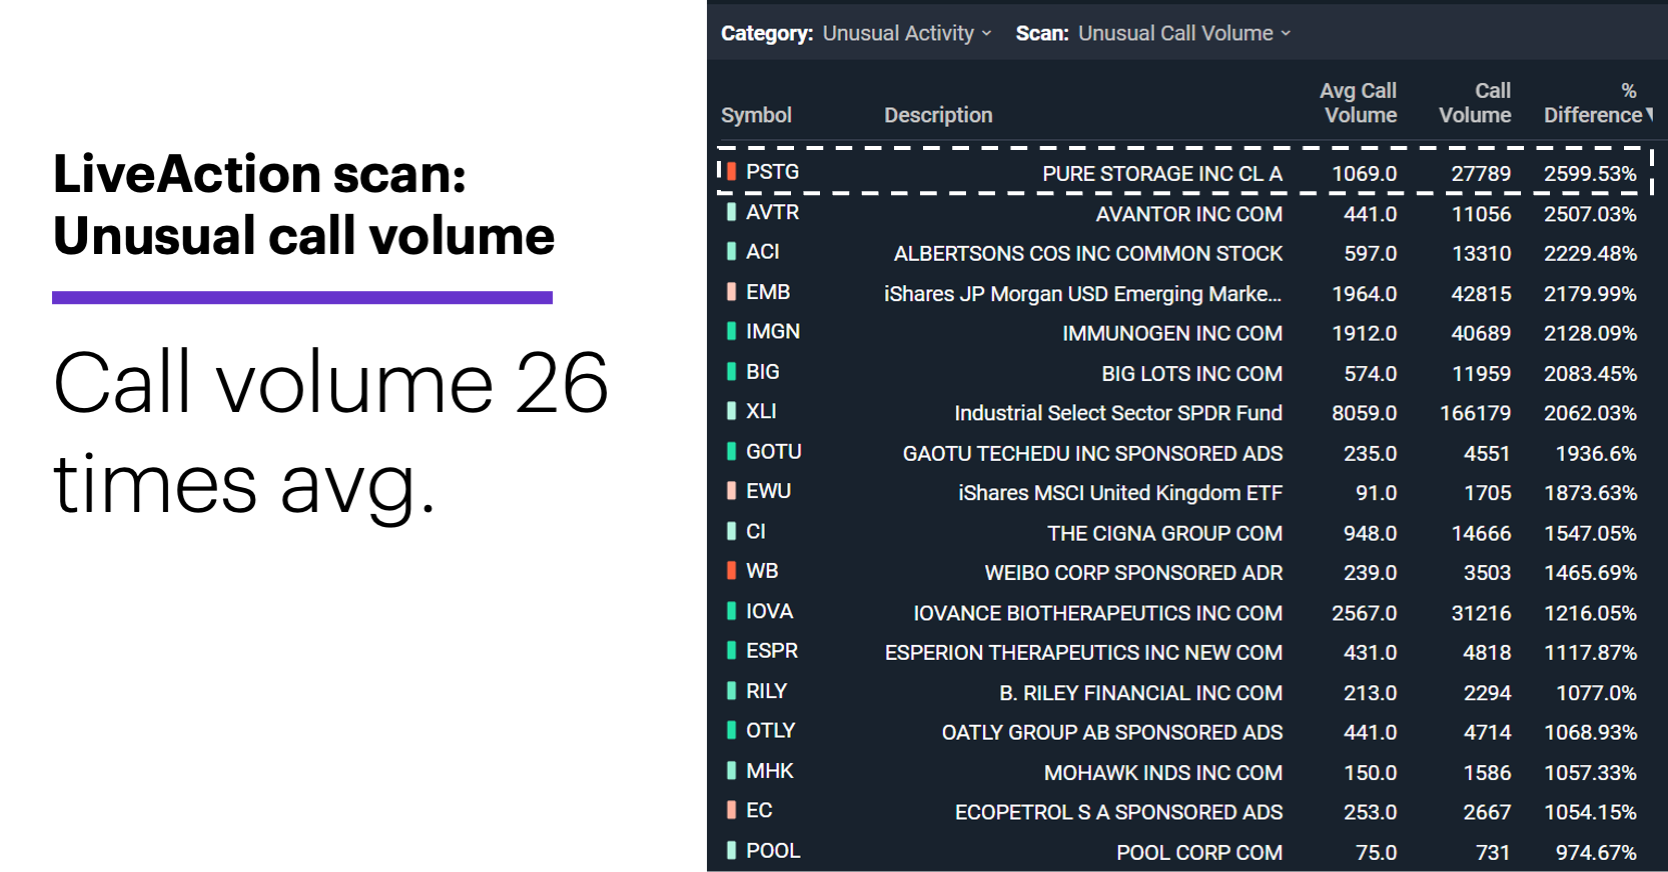 Chart 2: LiveAction scan: Unusual call volume. Call volume 26 times avg.